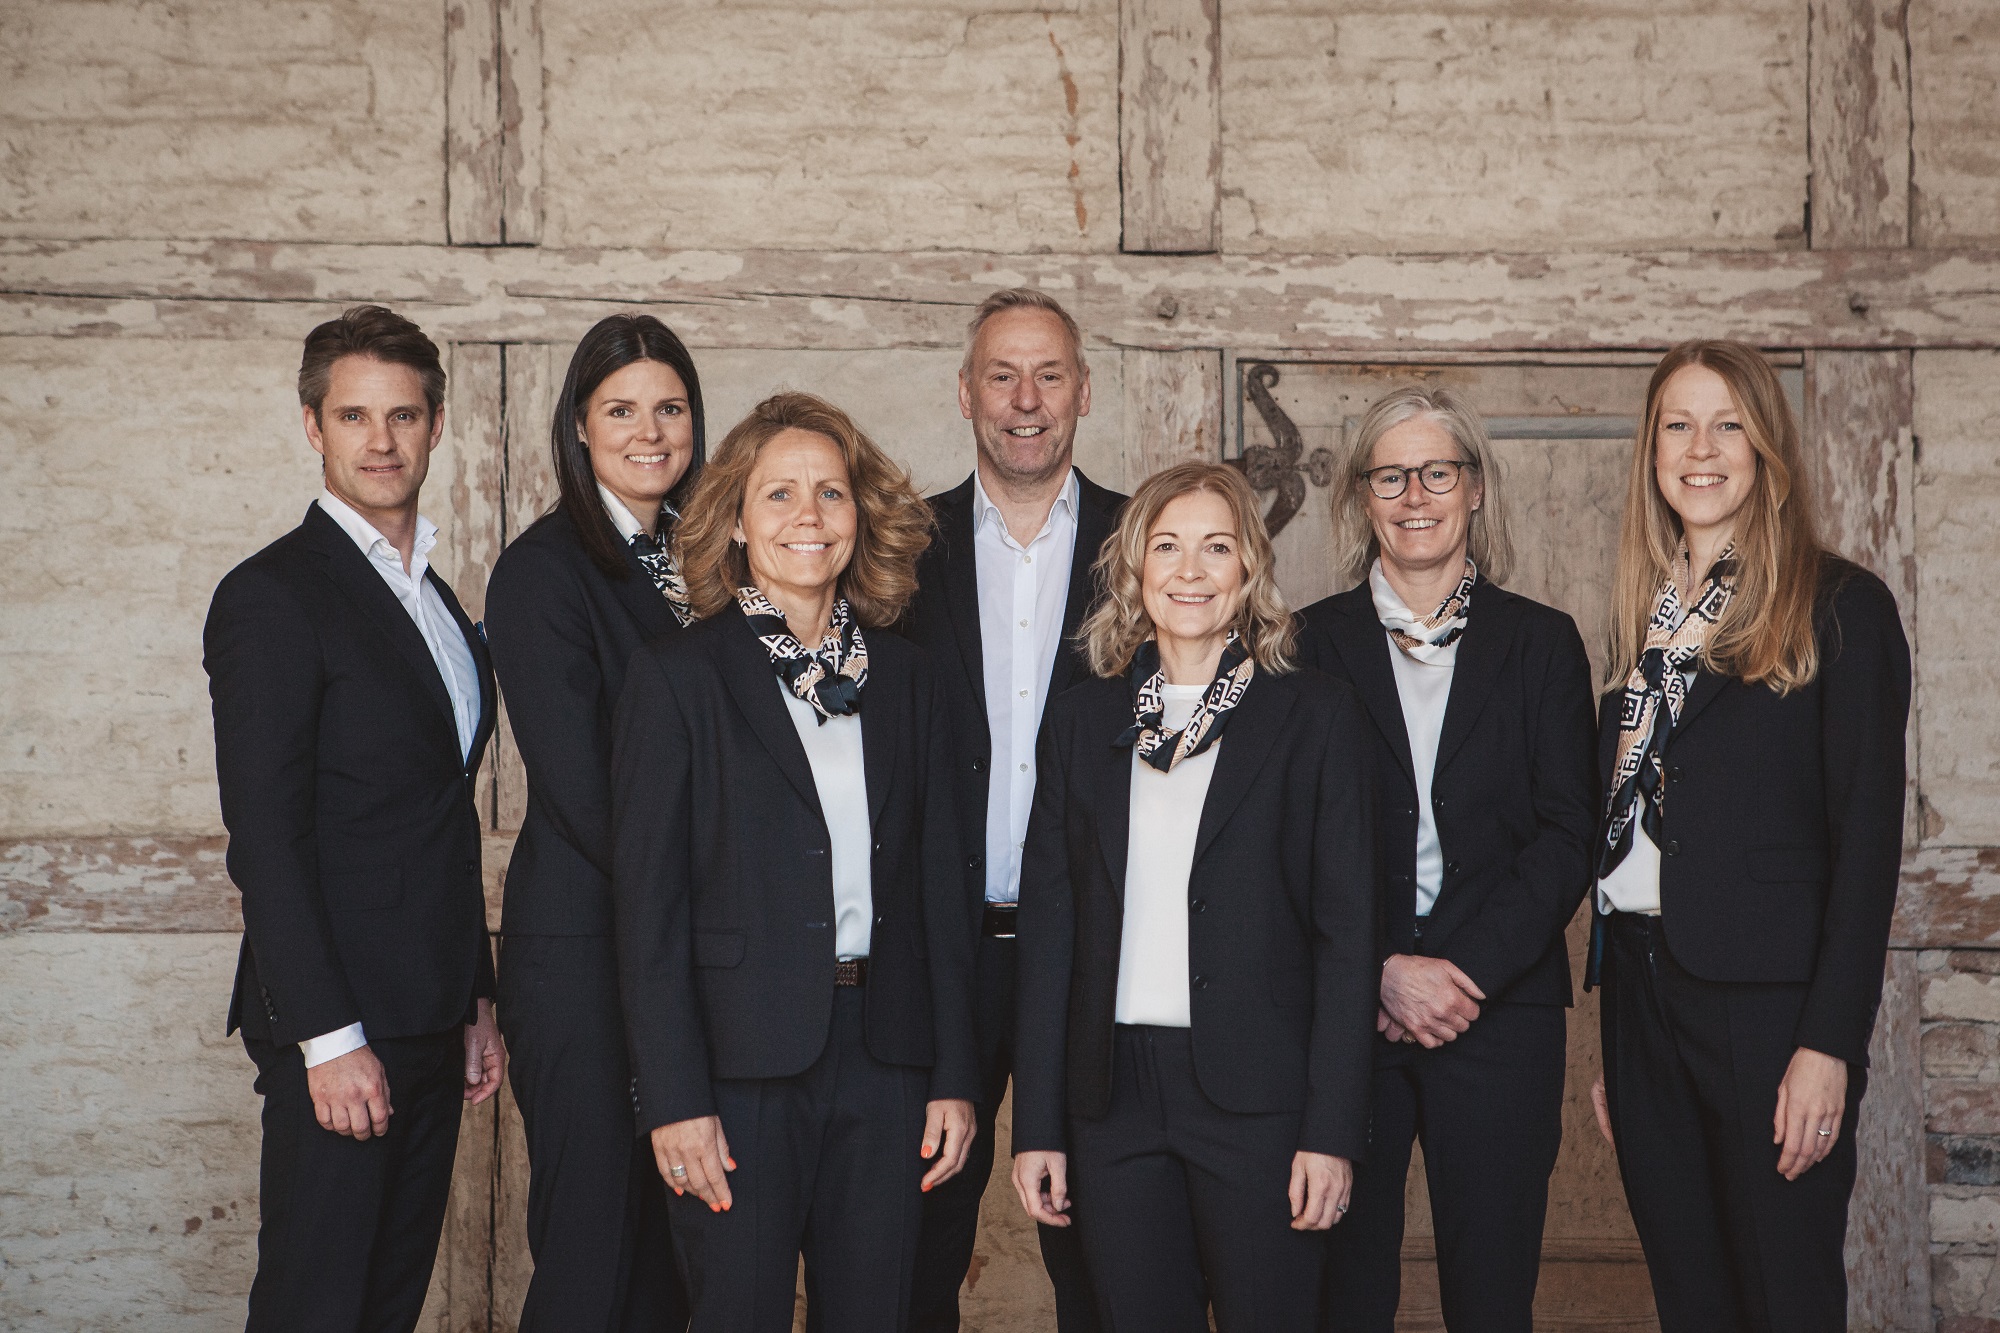 Companygroup in Vadstena Sparbank